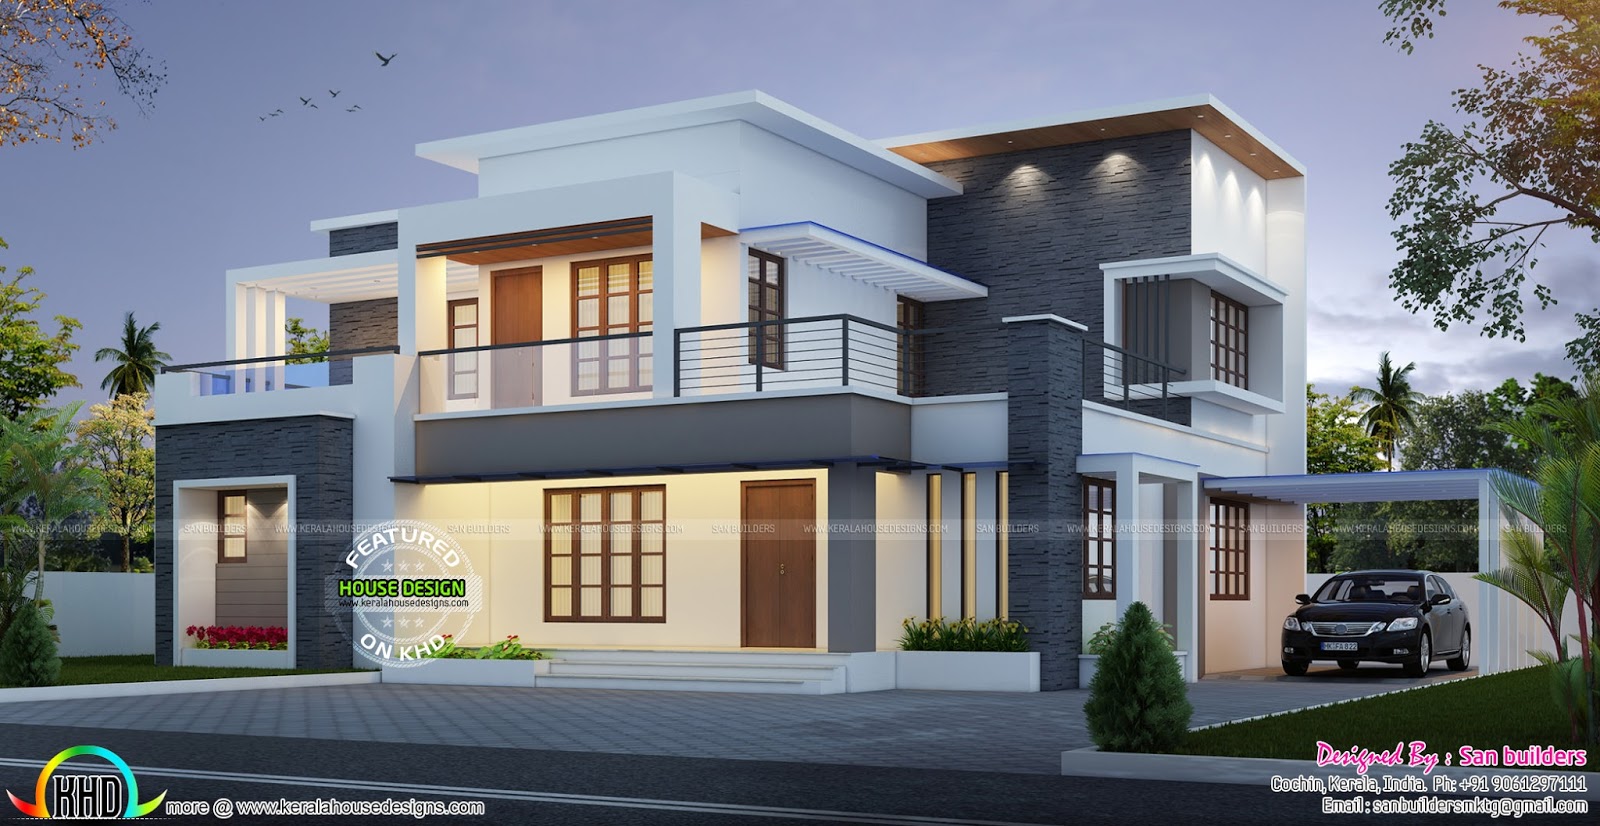 House plan and elevation by San builders - Kerala home design and floor